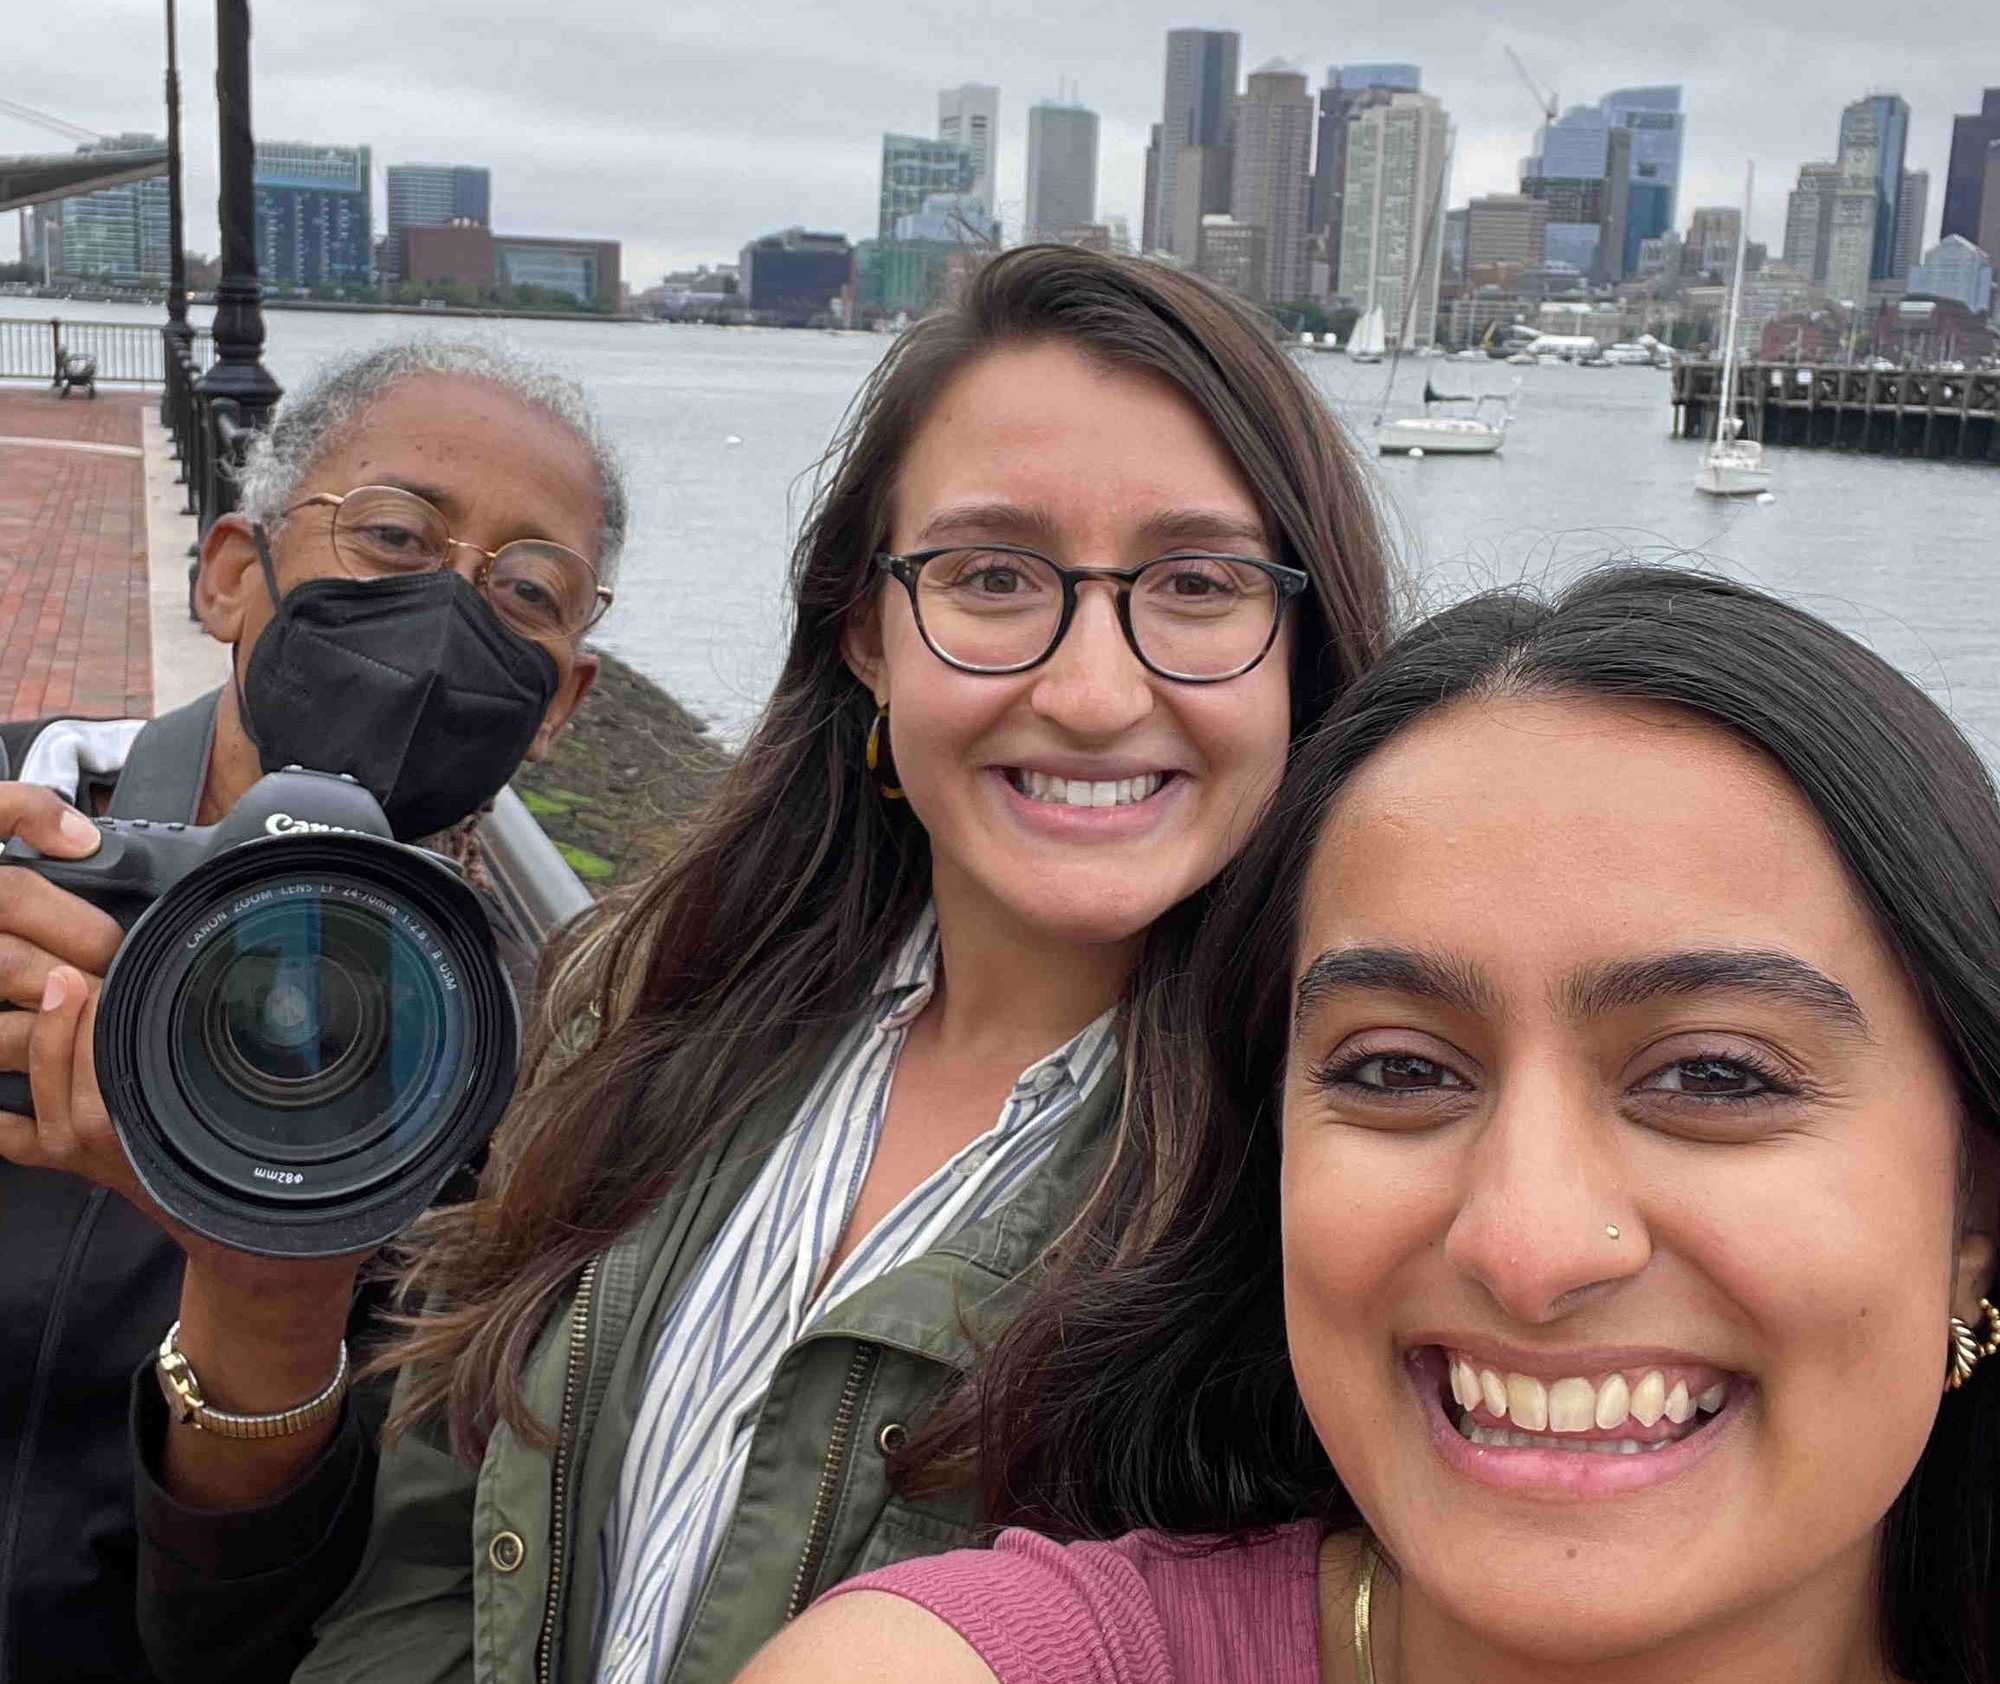 From left to right: Globe staffers Pat Greenhouse, Emma Platoff, and Diti Kohli finished up their journey on the Boston waterfront. 